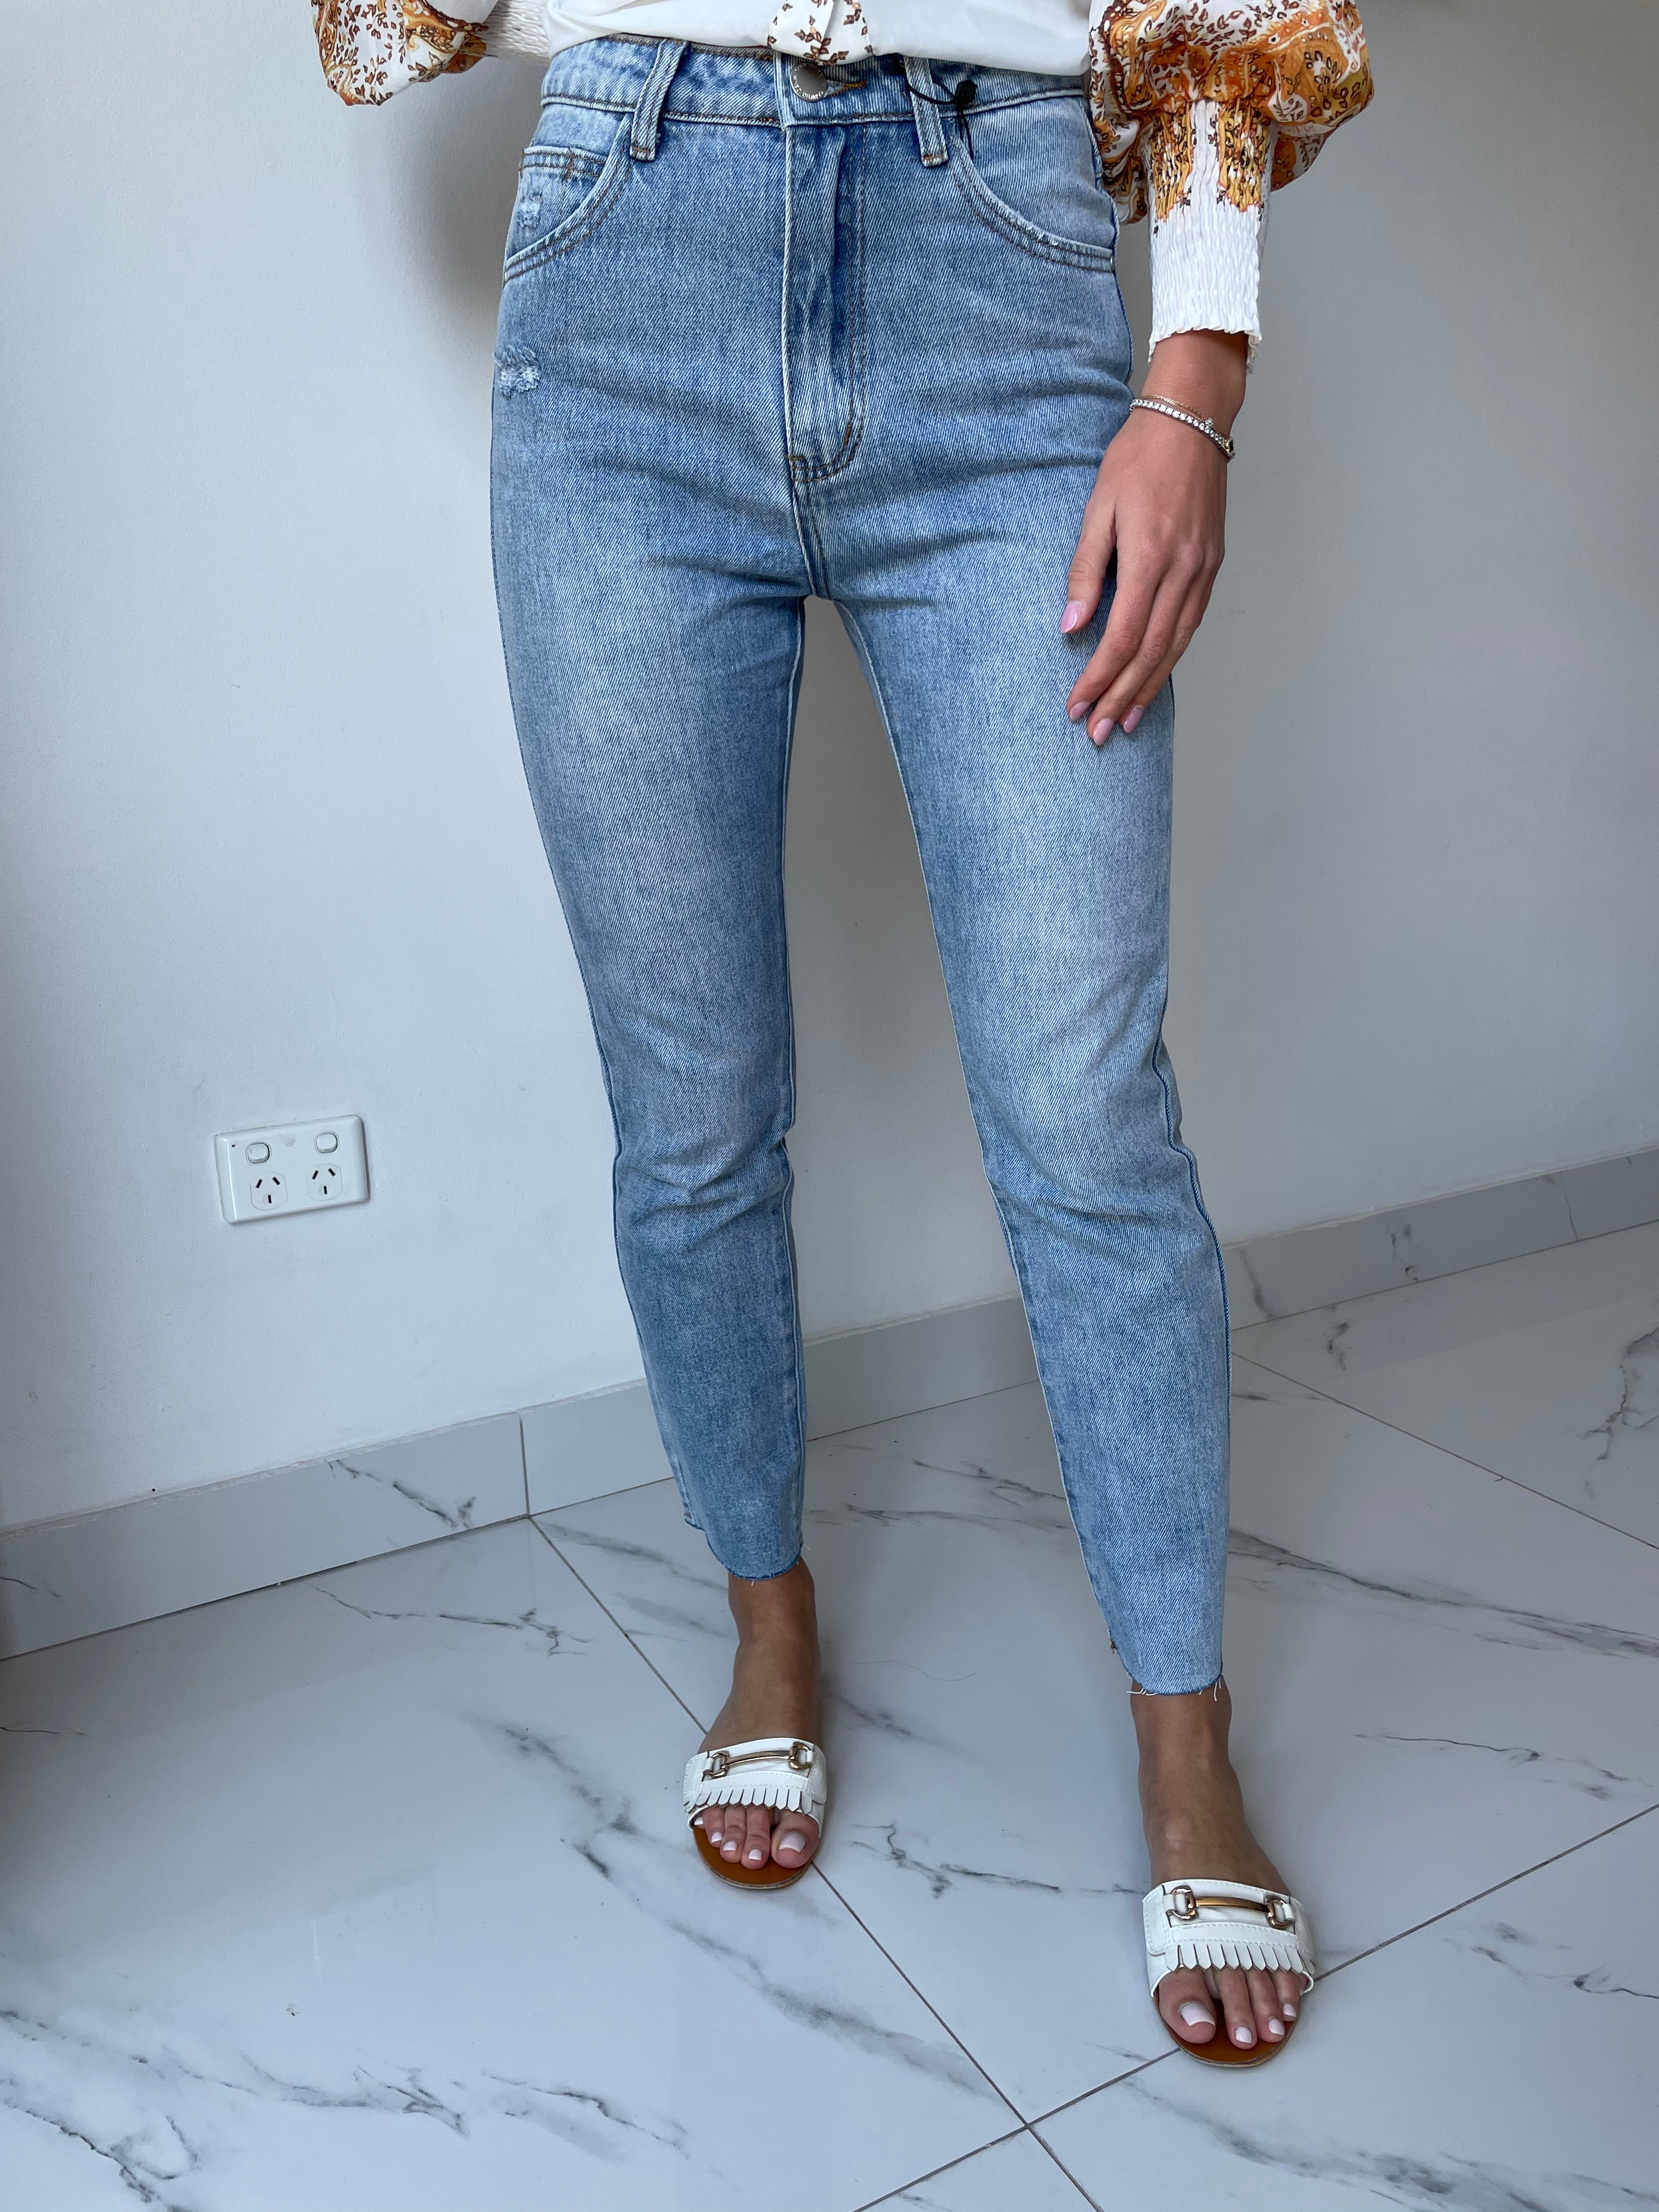 Style straight jeans